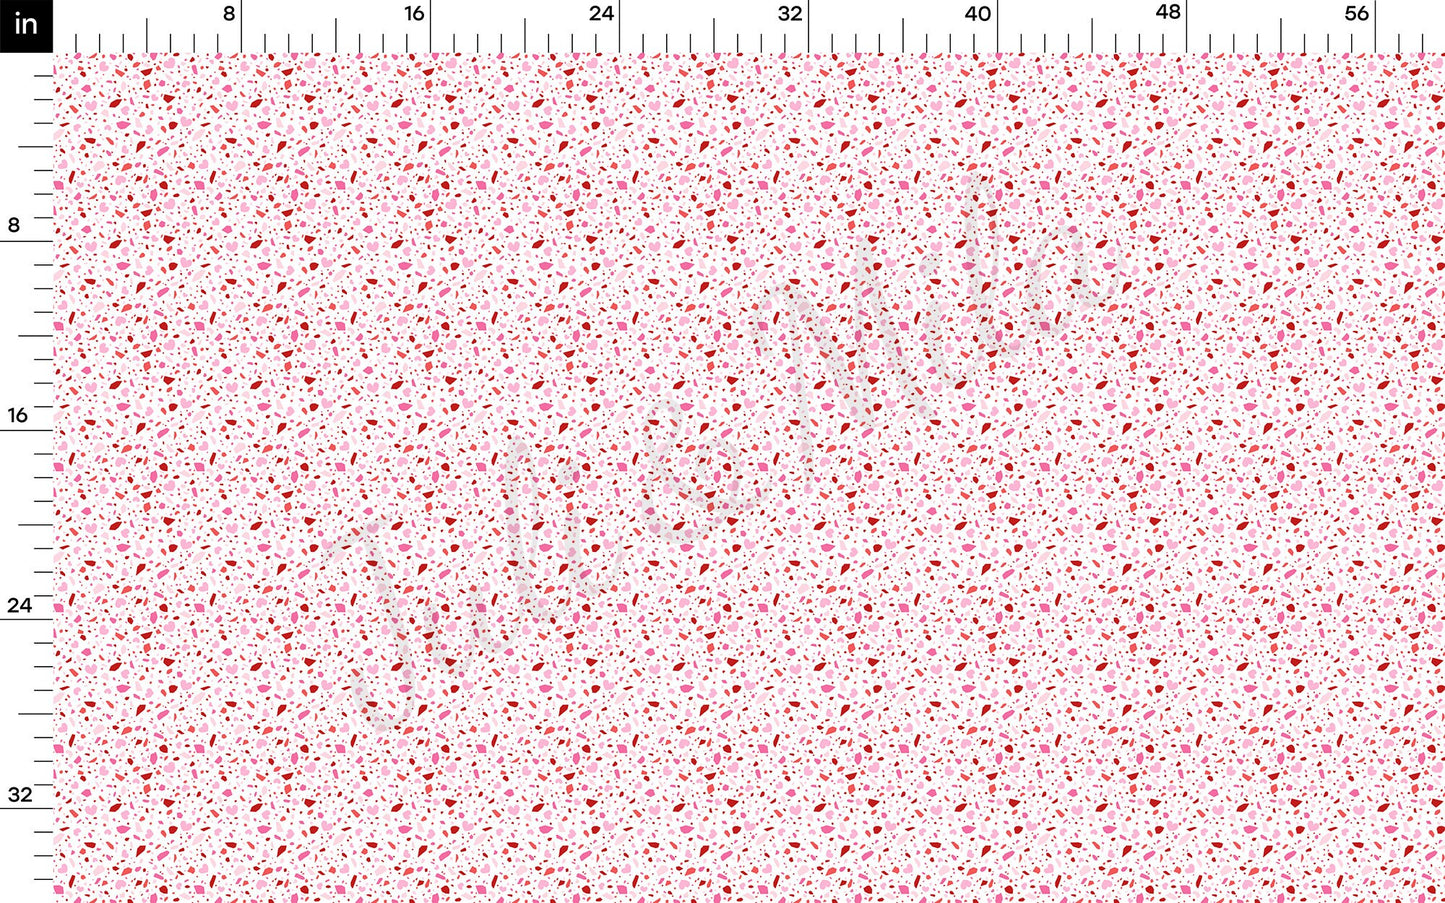 Valentines Day Bullet Textured Fabric  AA970